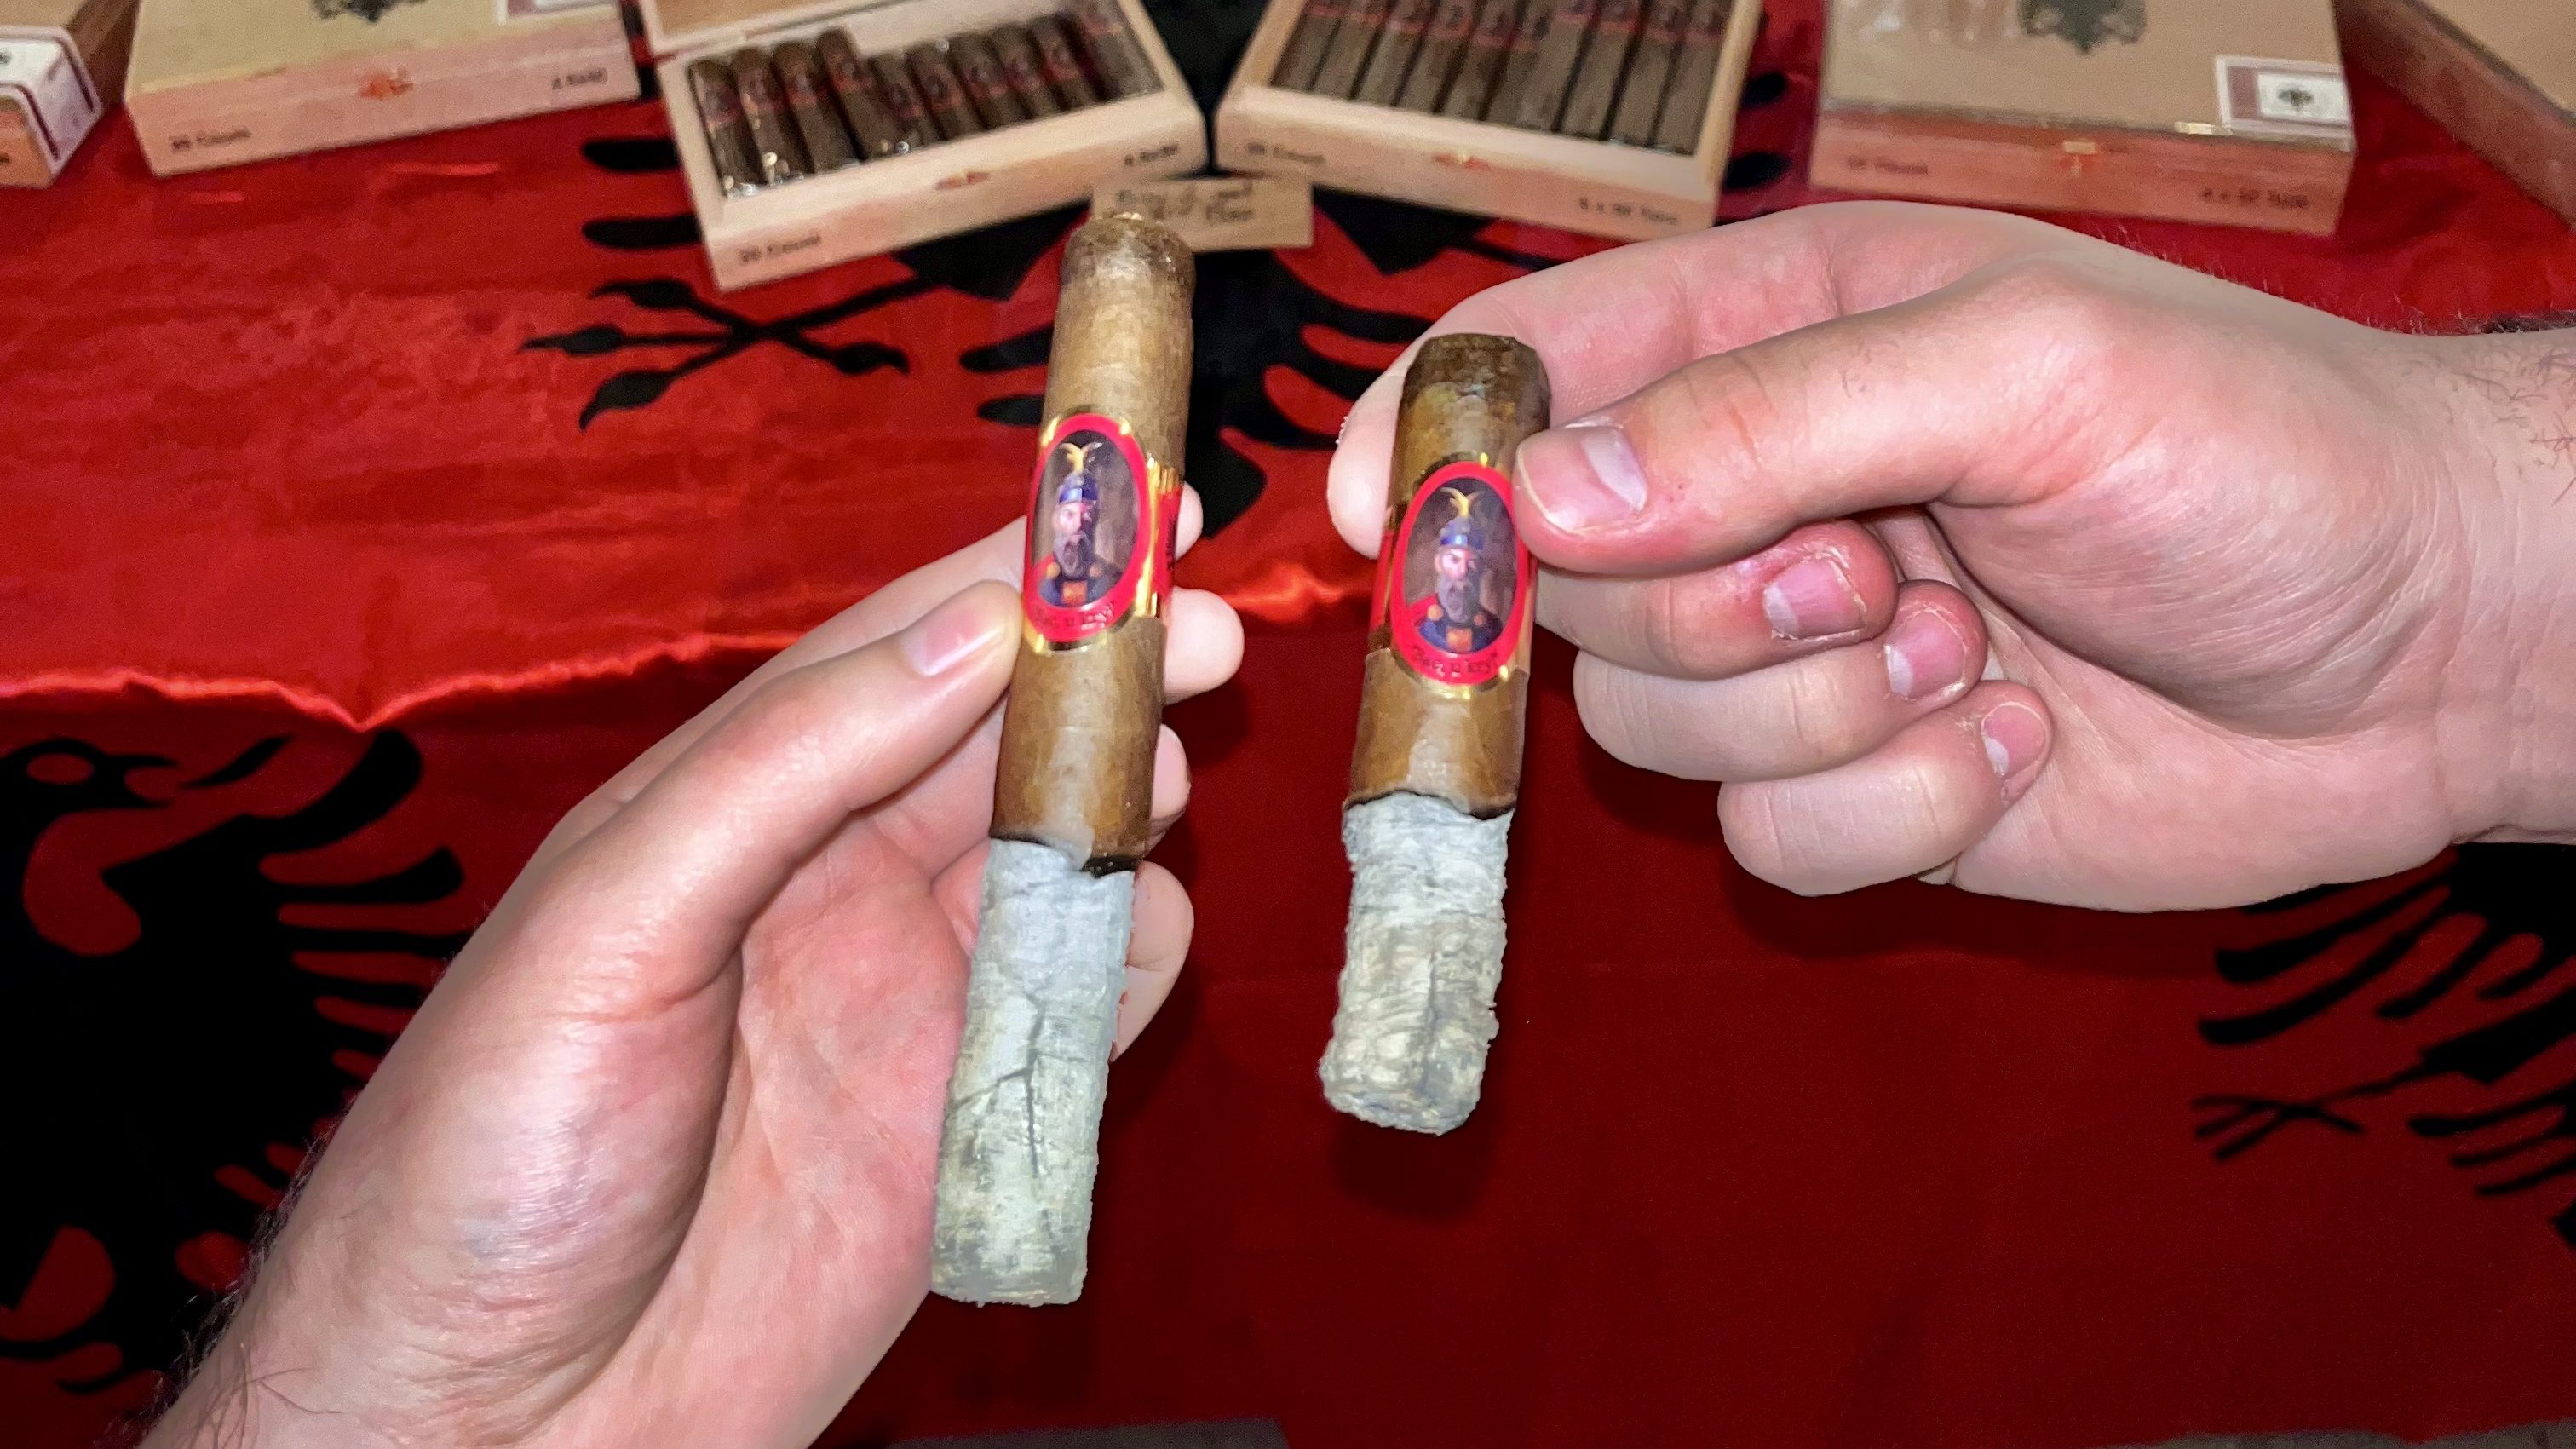 The Besa Cigar event at Historic Cigars in Longwood, FL.